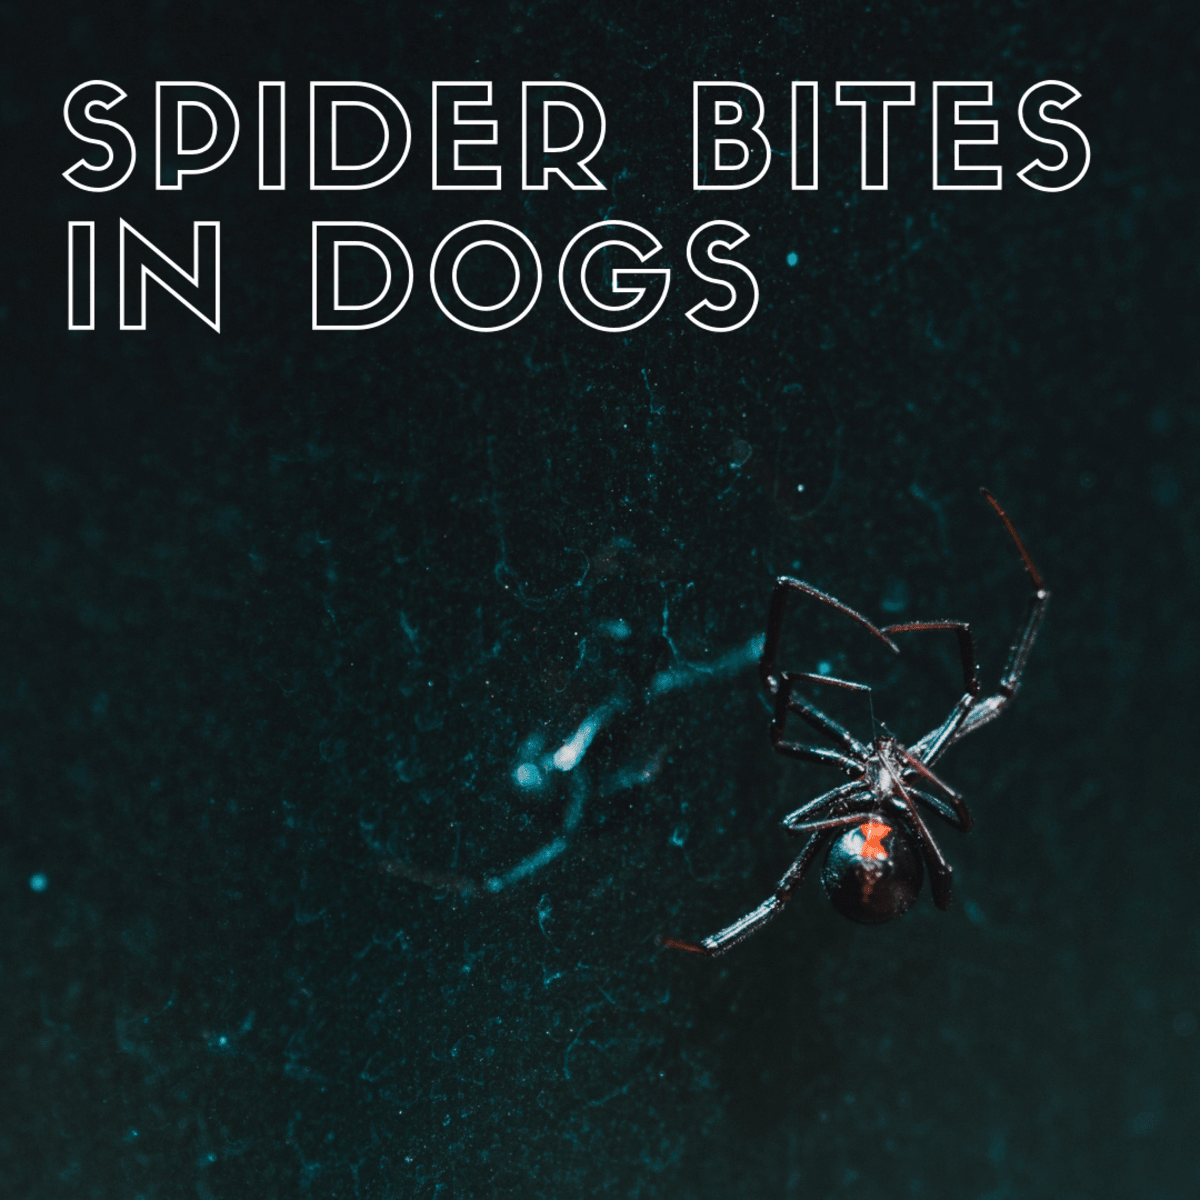 The Danger Of Spider Bites To Your Dog Photos Of The Wolf Spider Bite My Dog Suffered Pethelpful By Fellow Animal Lovers And Experts